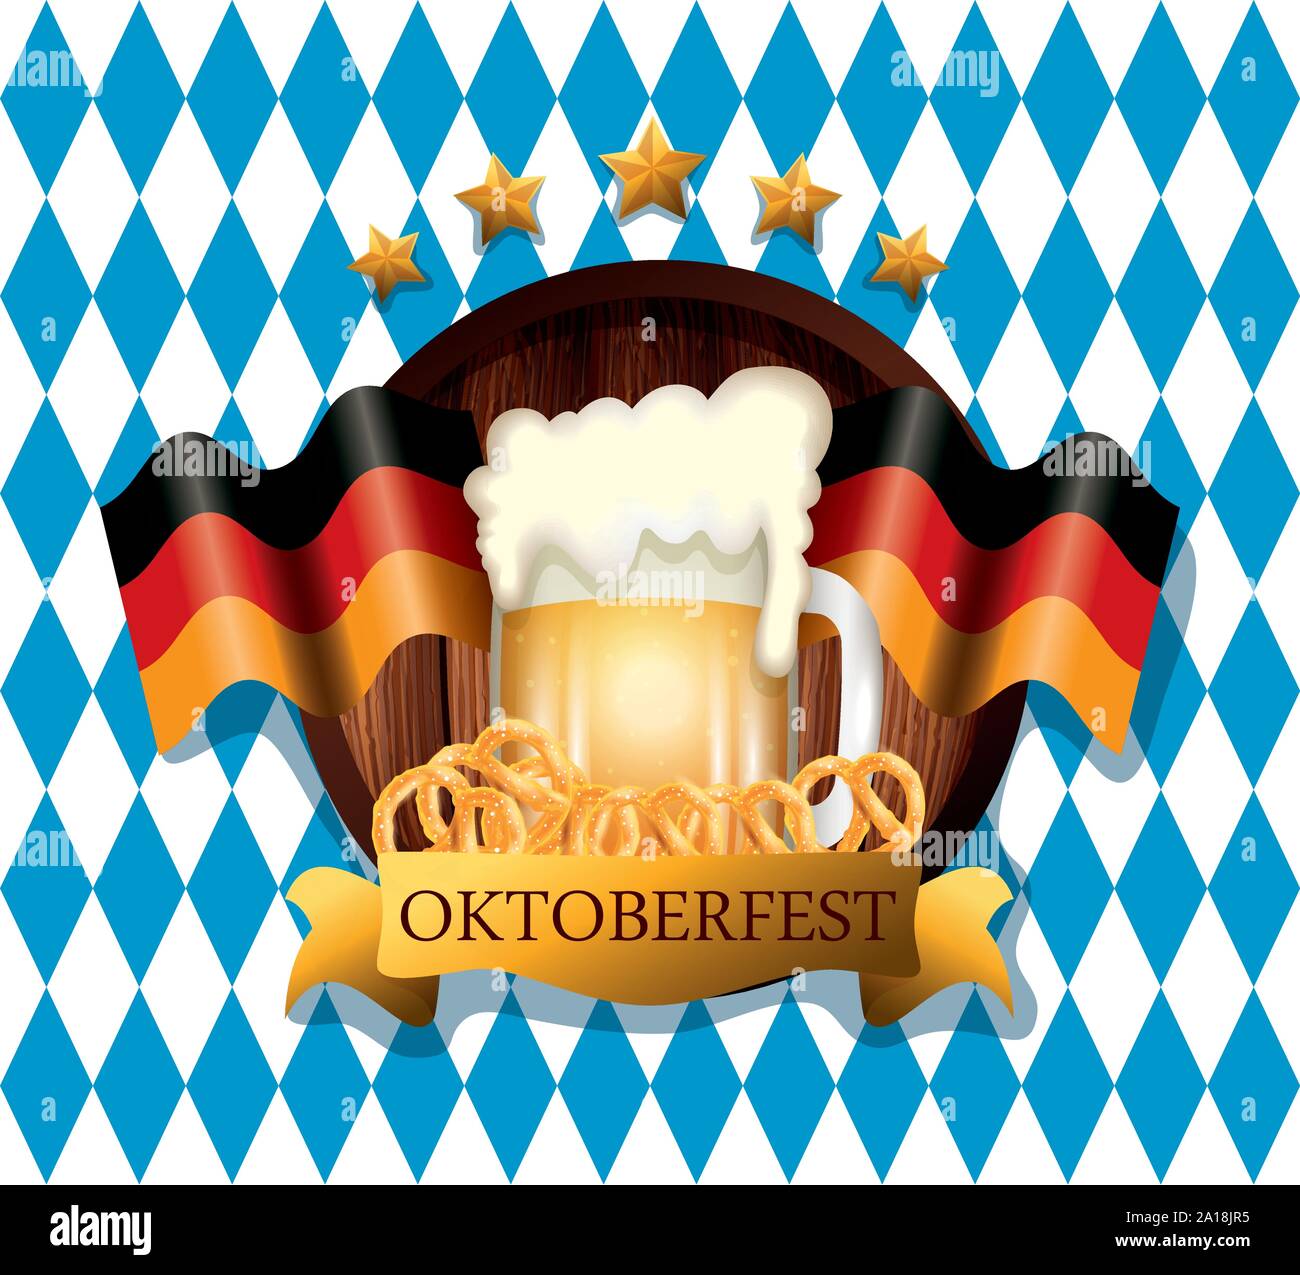 Oktoberfest Germany High Resolution Stock Photography and Images - Alamy